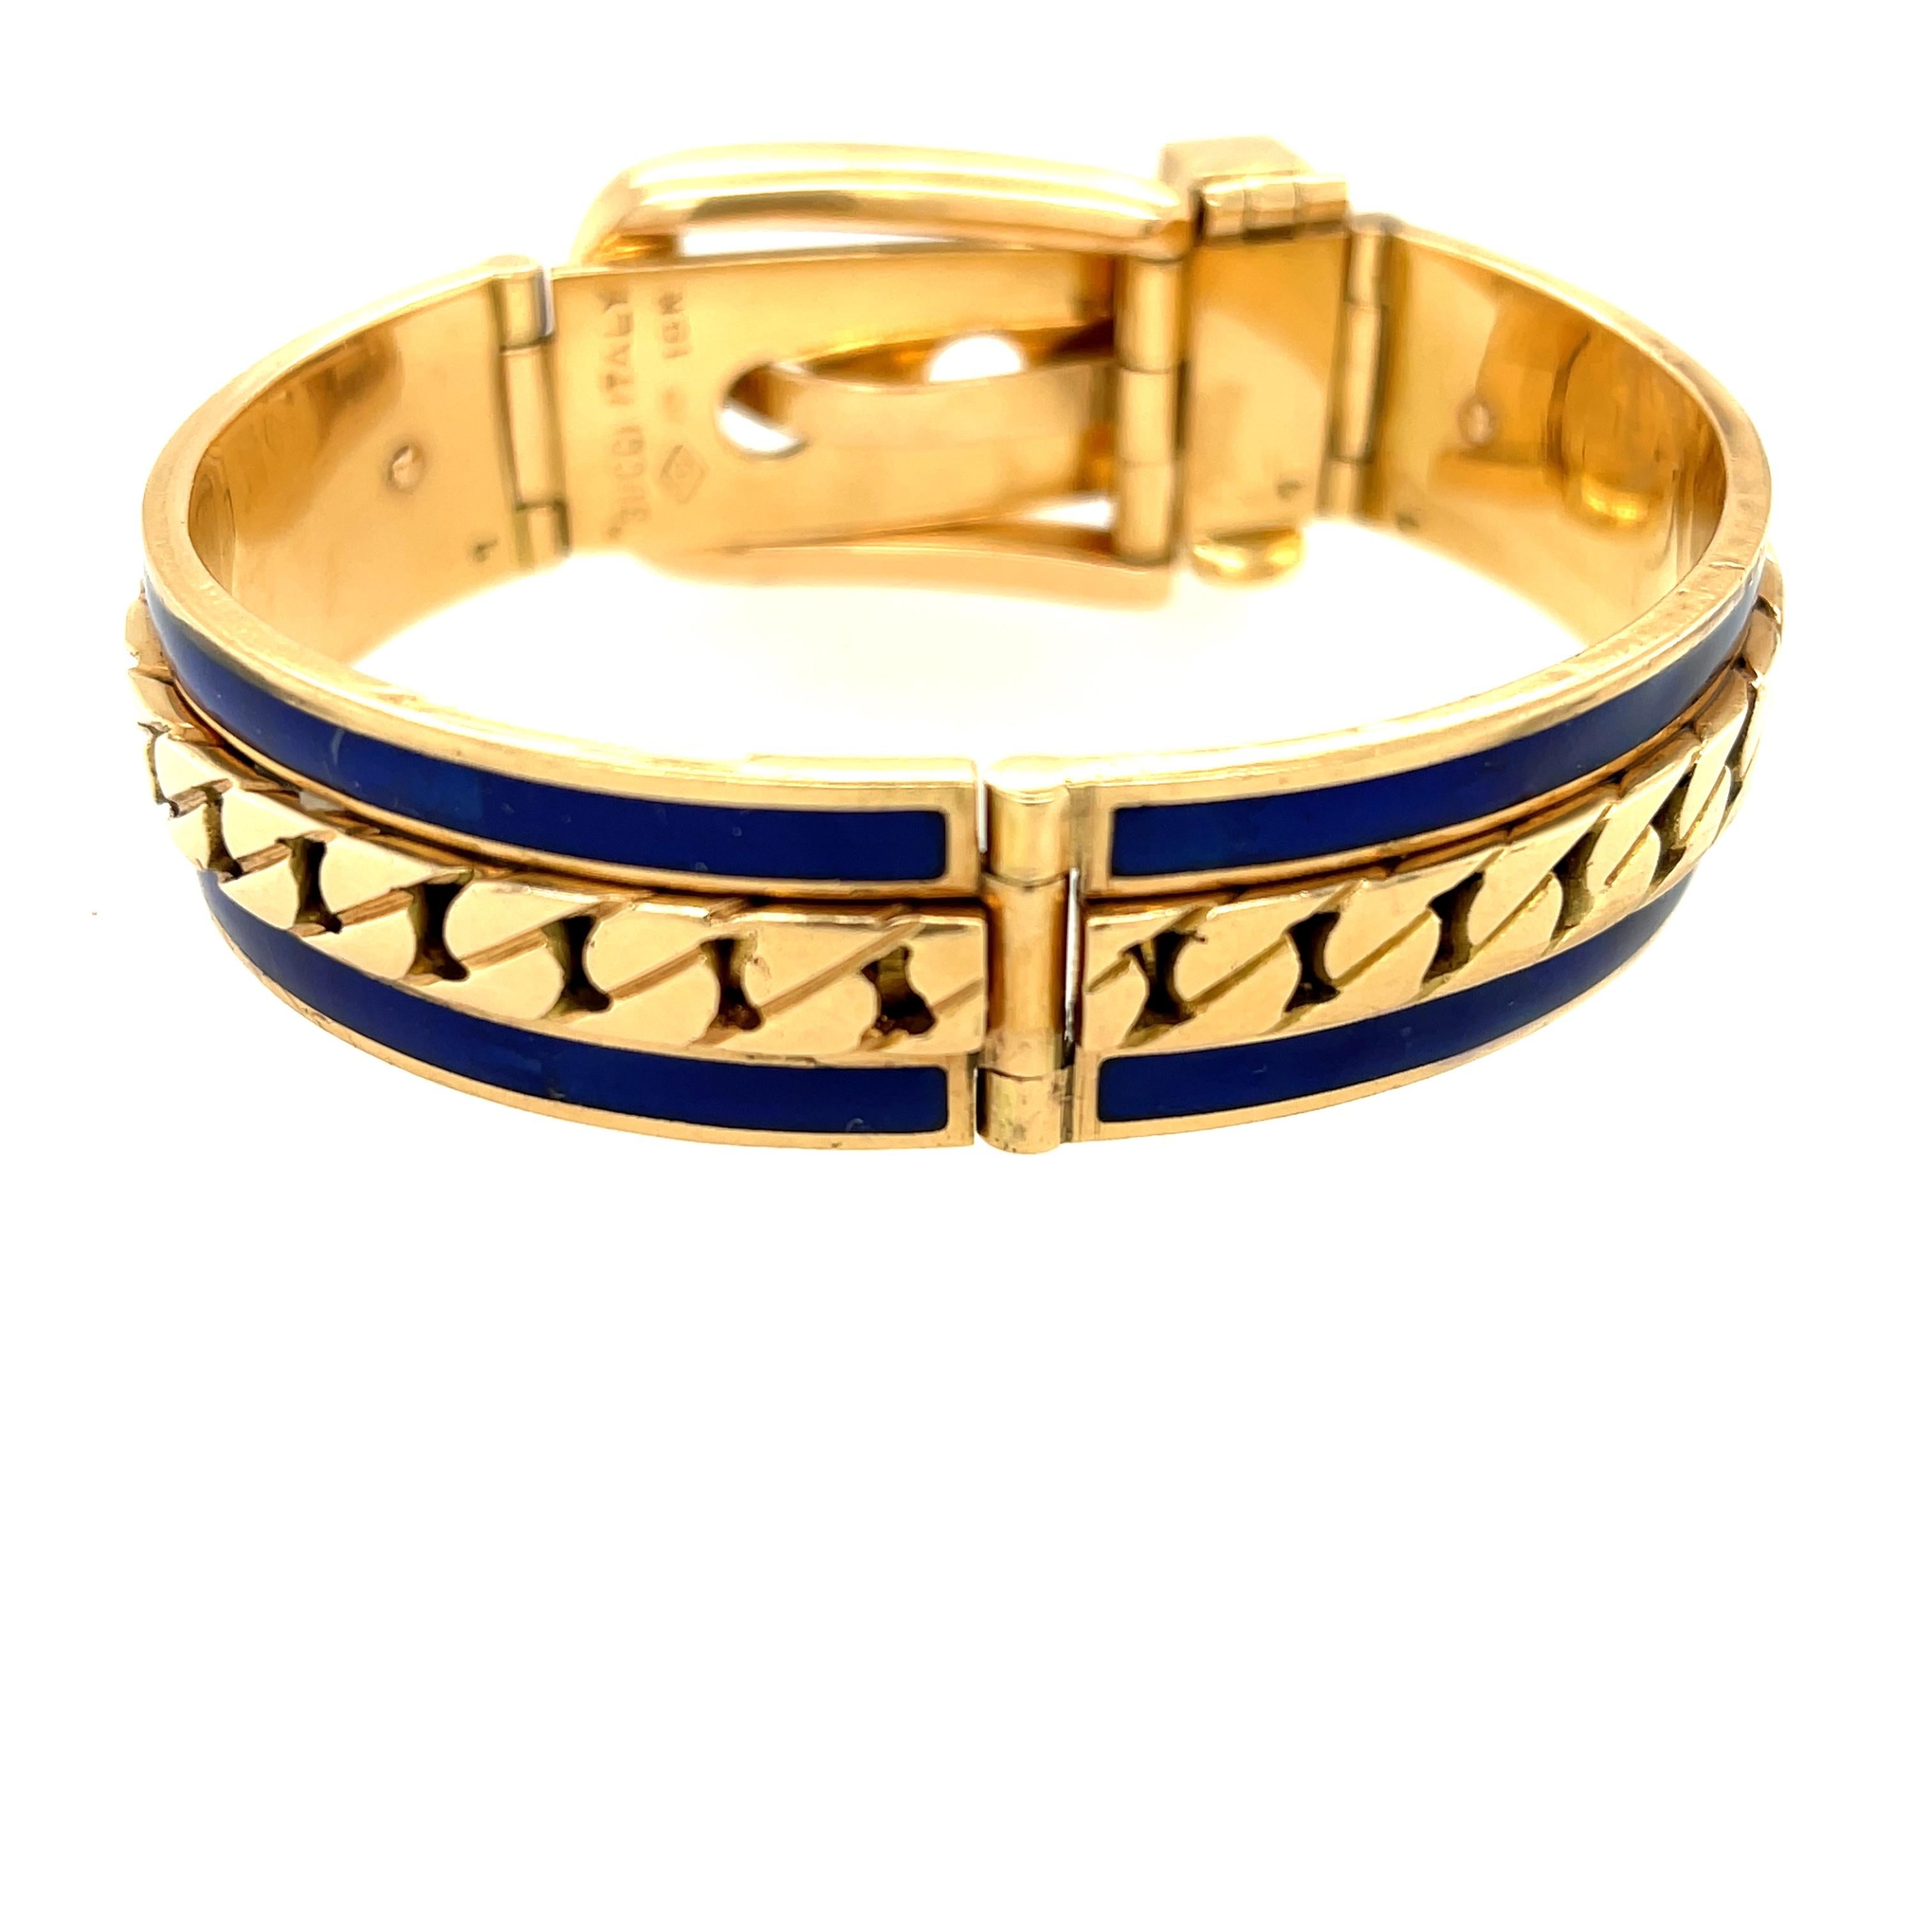 A vintage 18k gold and blue enamel buckle bracelet by Gucci circa 1970. This bracelet has the classic Cuban link detail on the sides of the bangle, between two stripes of blue enamel. The bracelet is made like a belt, with a working buckle. The